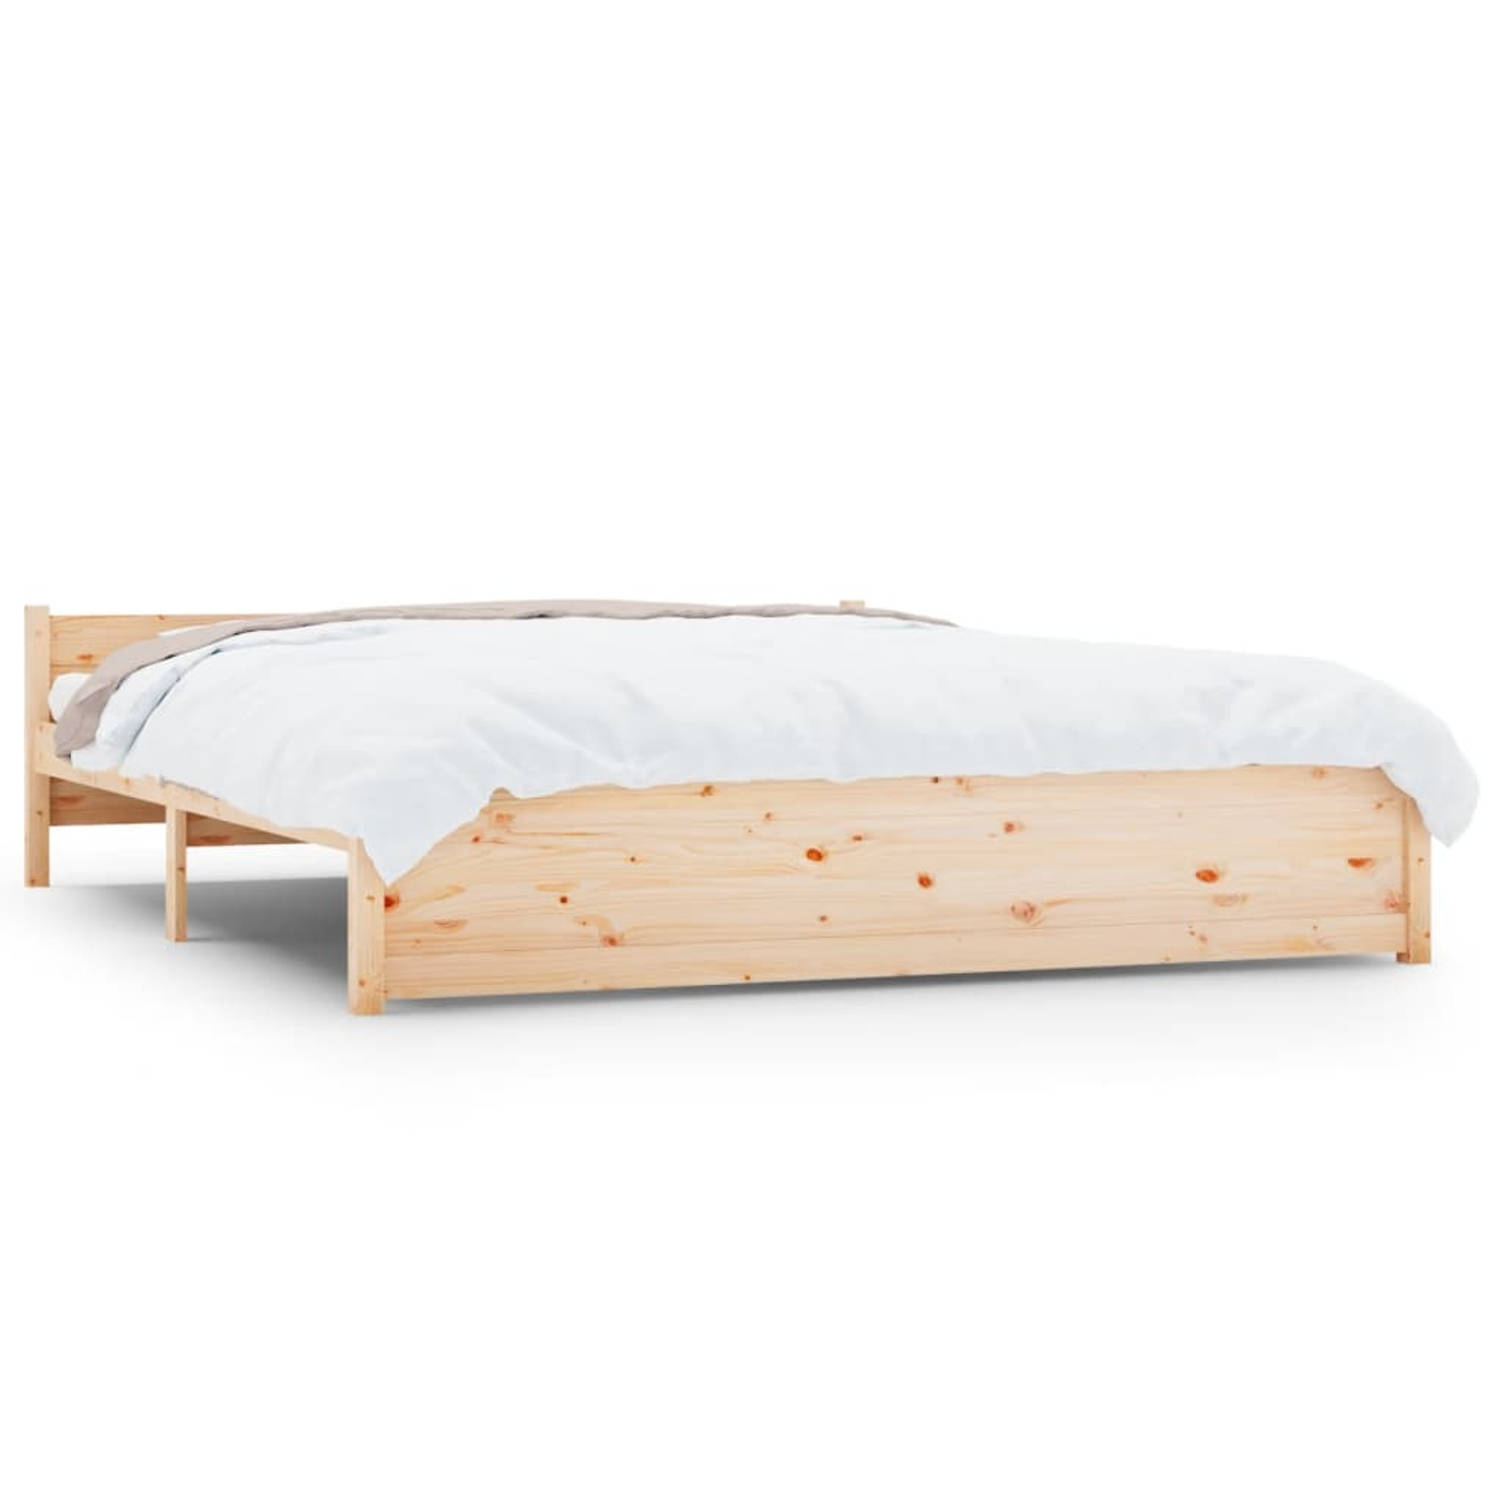 The Living Store Bedframe massief hout 200x200 cm - Bed